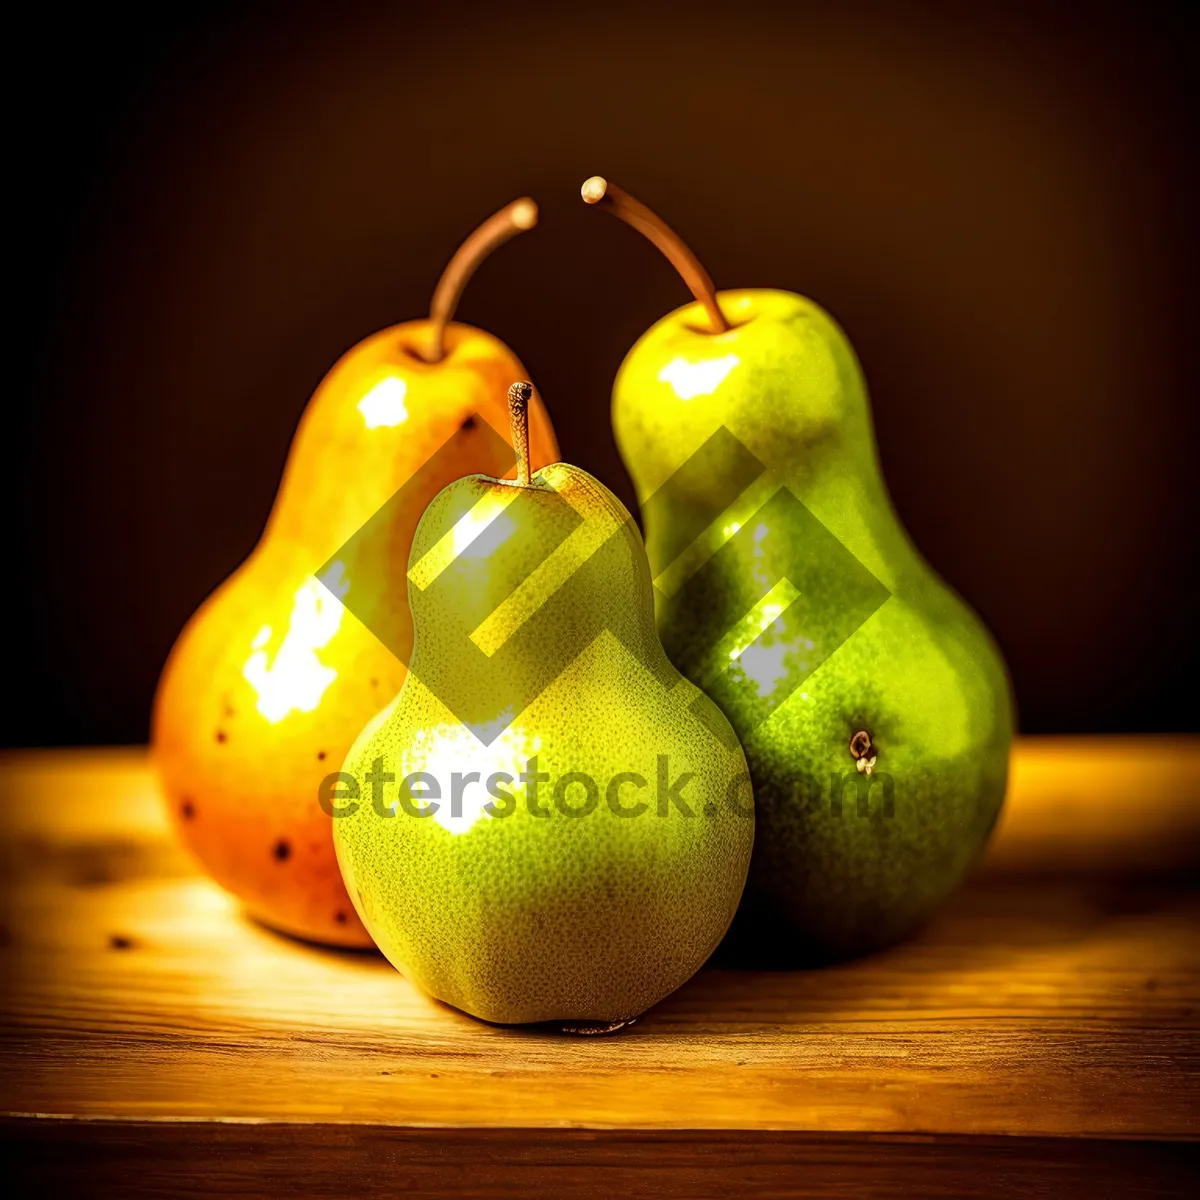 Picture of Juicy and Sweet Pear - Fresh and Healthy Fruit